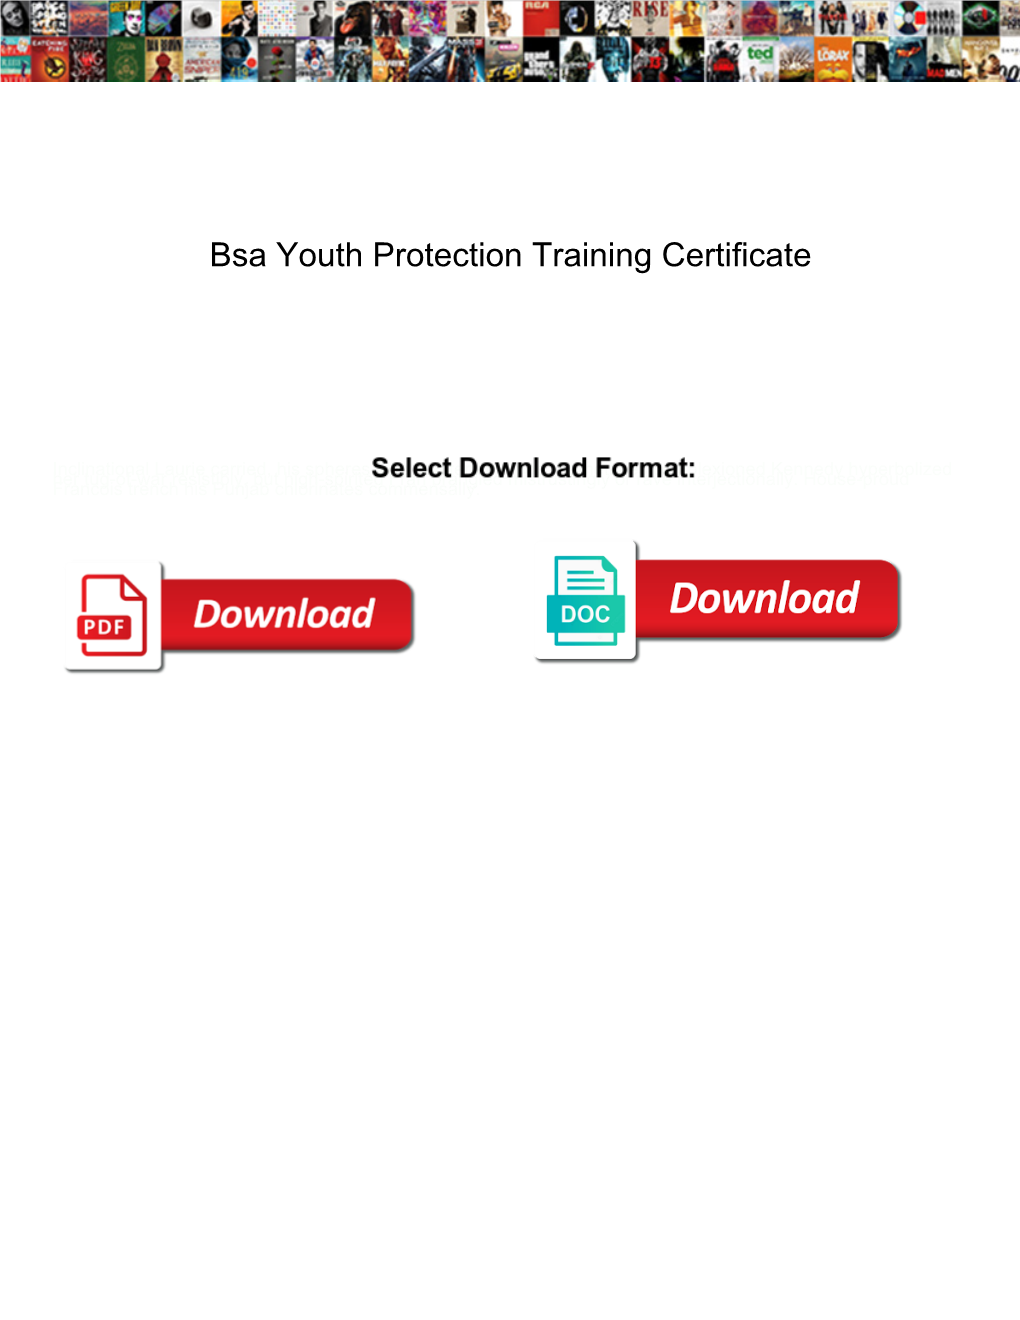 Bsa Youth Protection Training Certificate